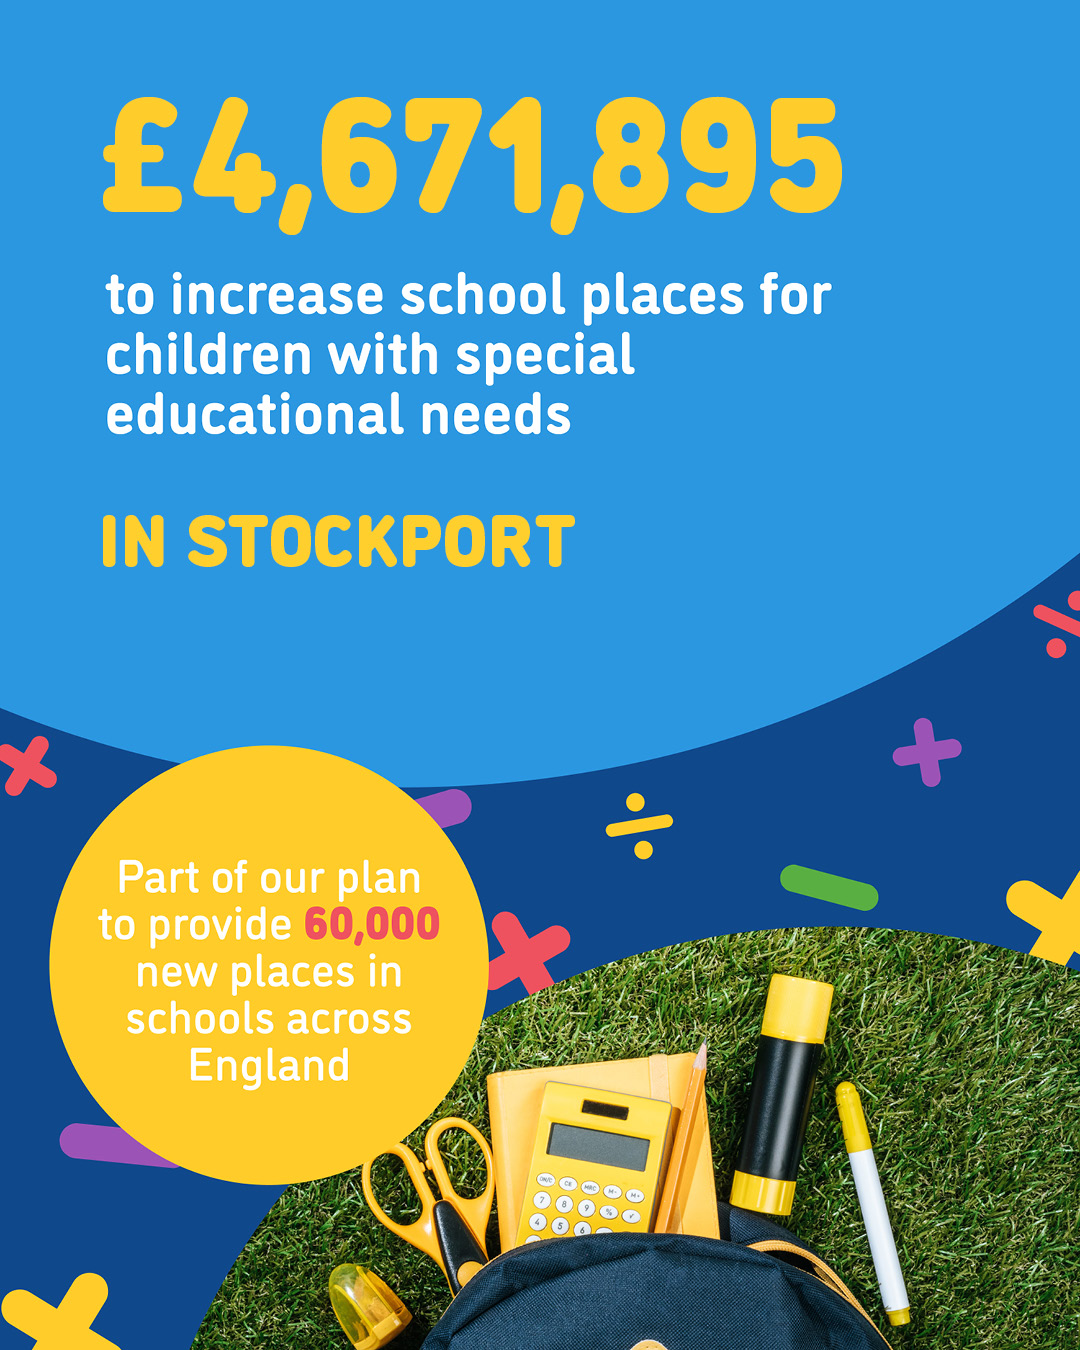 Graphic stating that £4,671,895 of funding is going to Stockport borough to increase school places for children with special educational needs